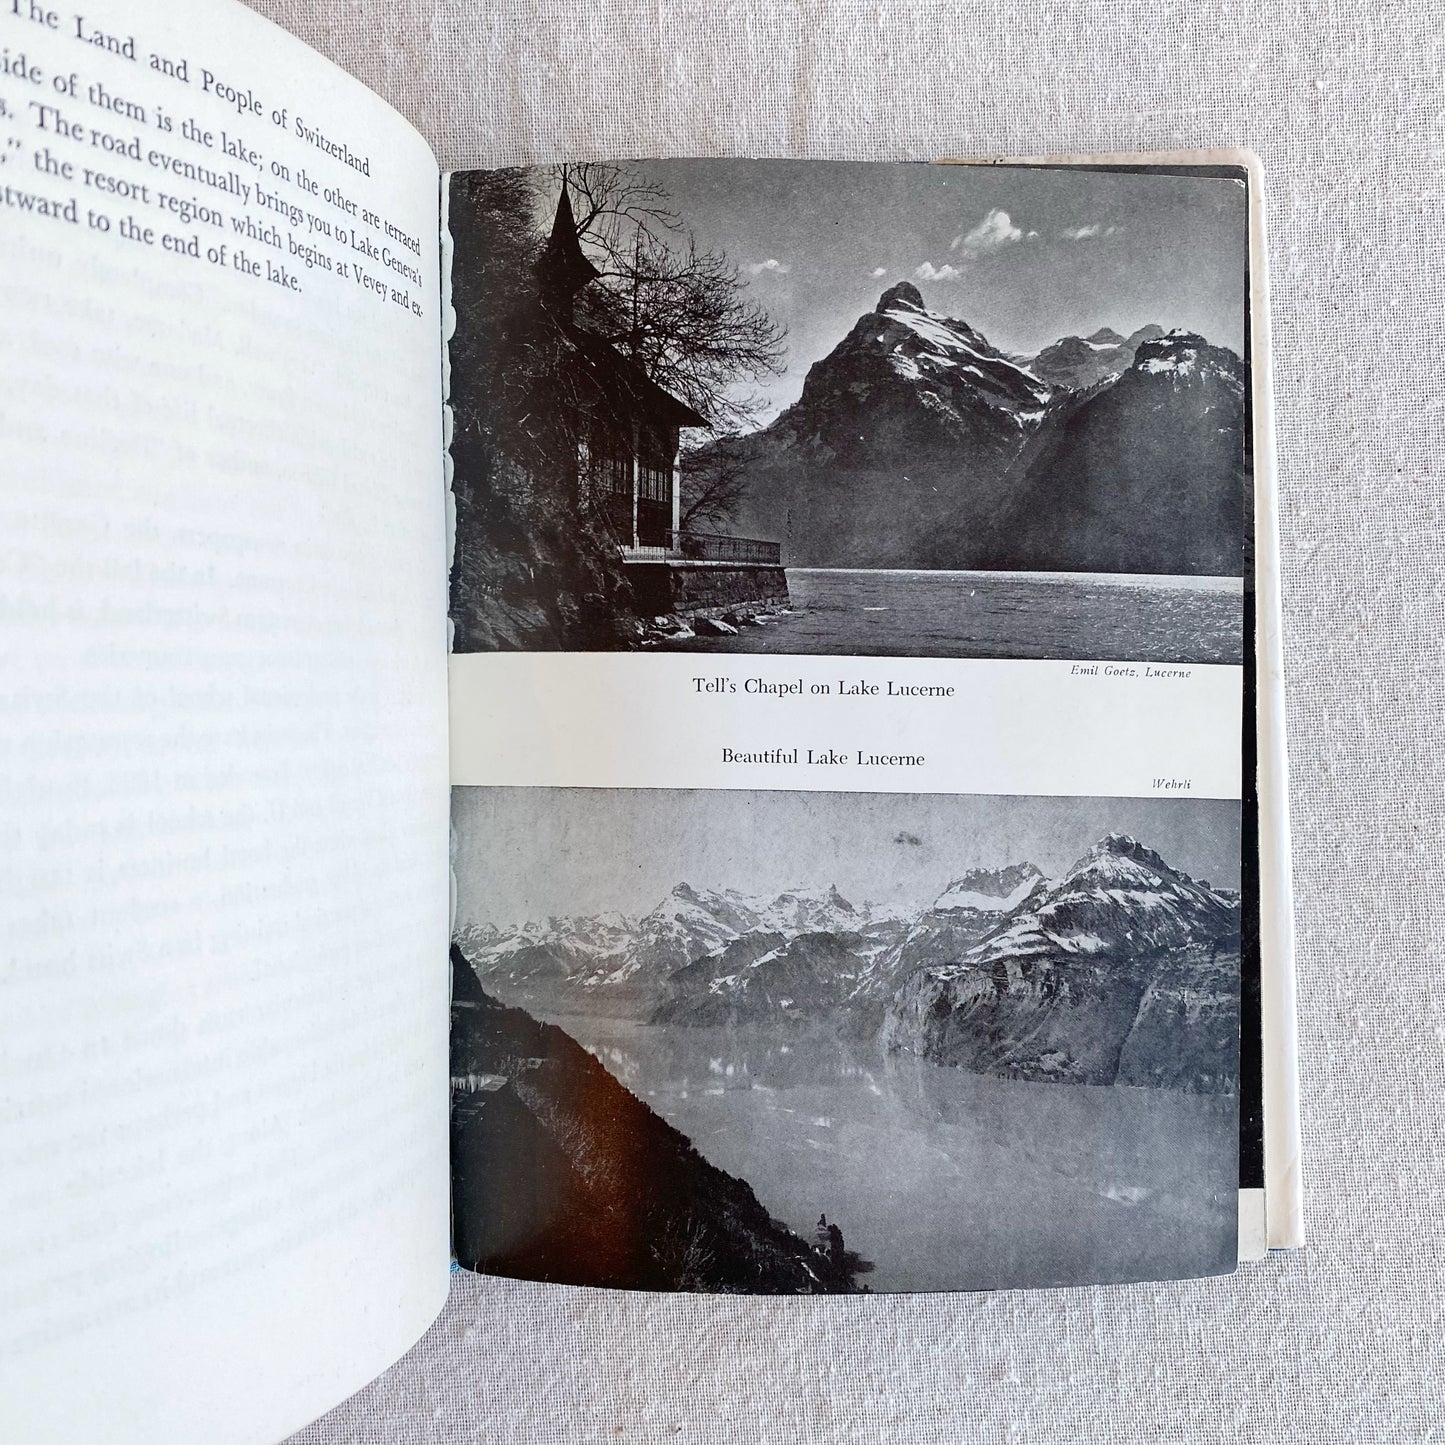 Book: The Land and People of Switzerland